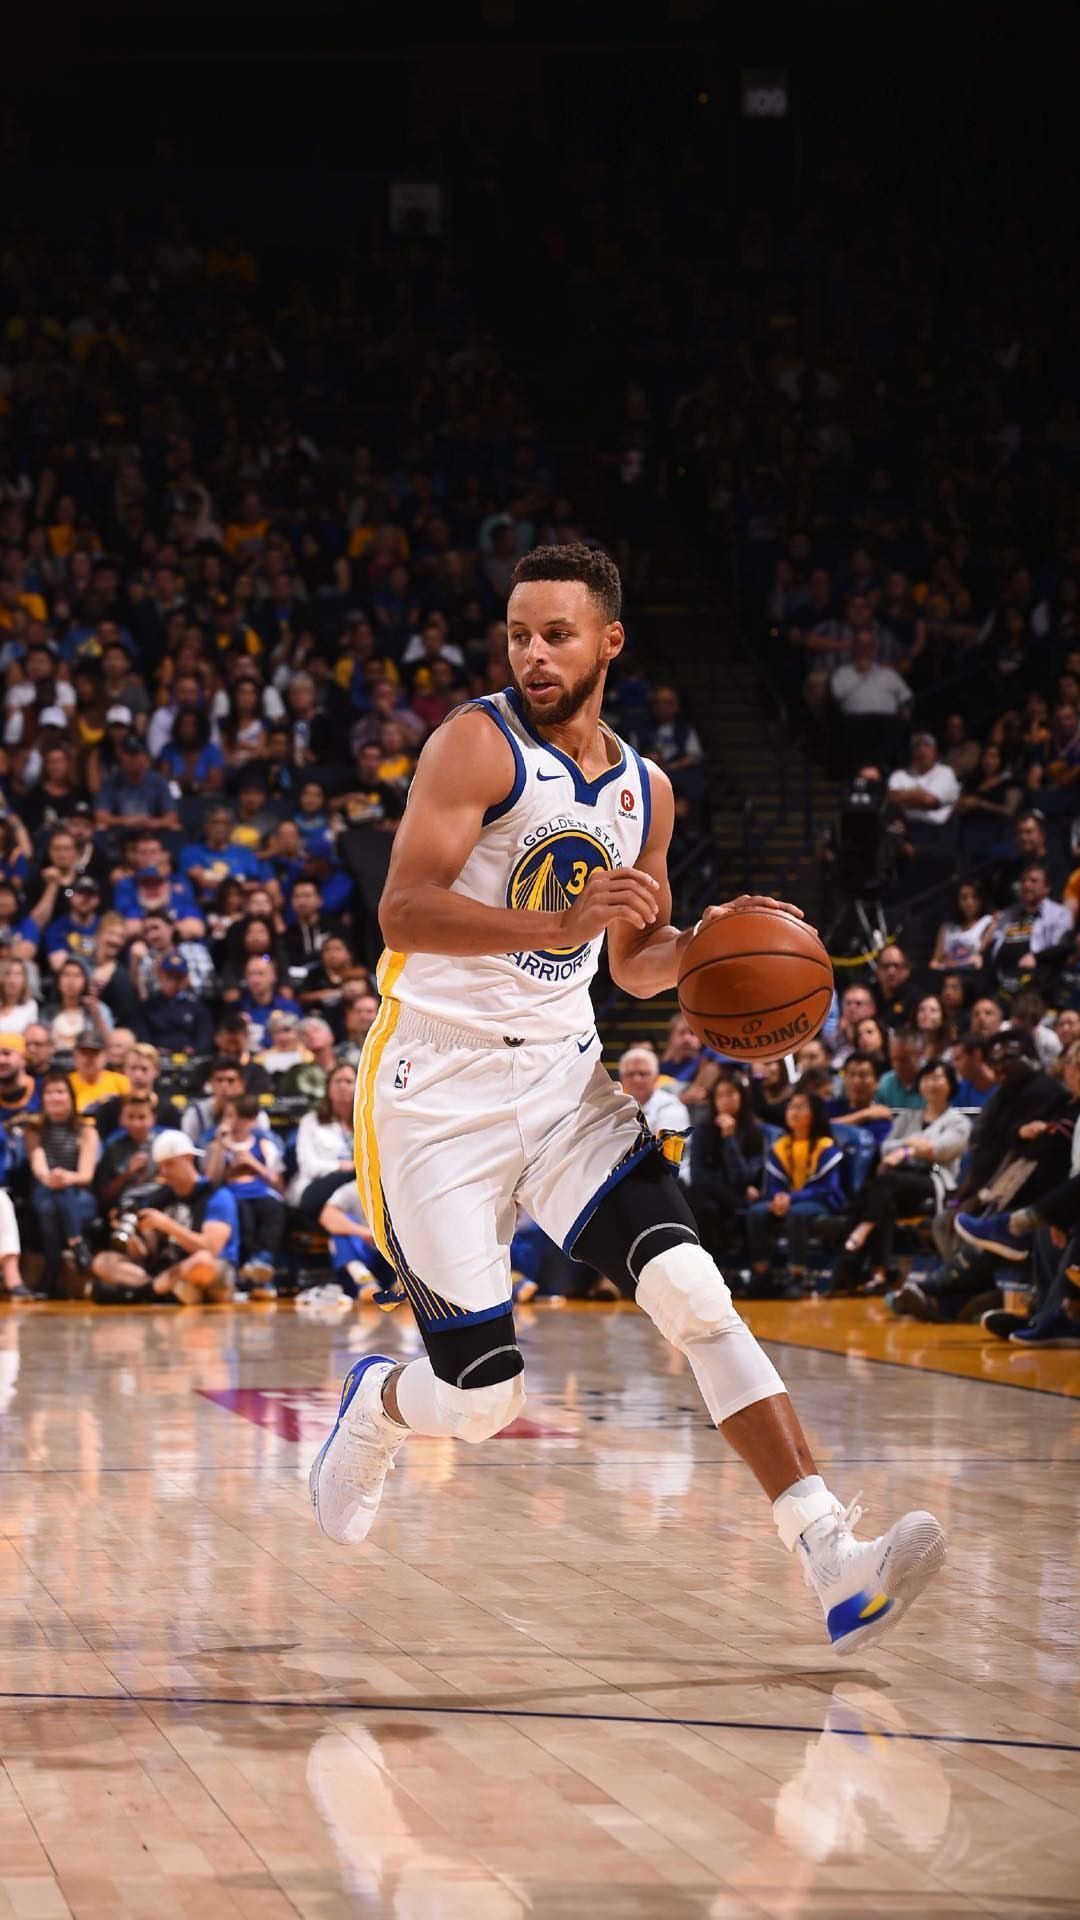 Great 8 Curry Wallpaper Full HD For Your Android or iPhone Wallpaper #android #iphone #wallpaper. Stephen curry wallpaper, Stephen curry, Curry wallpaper